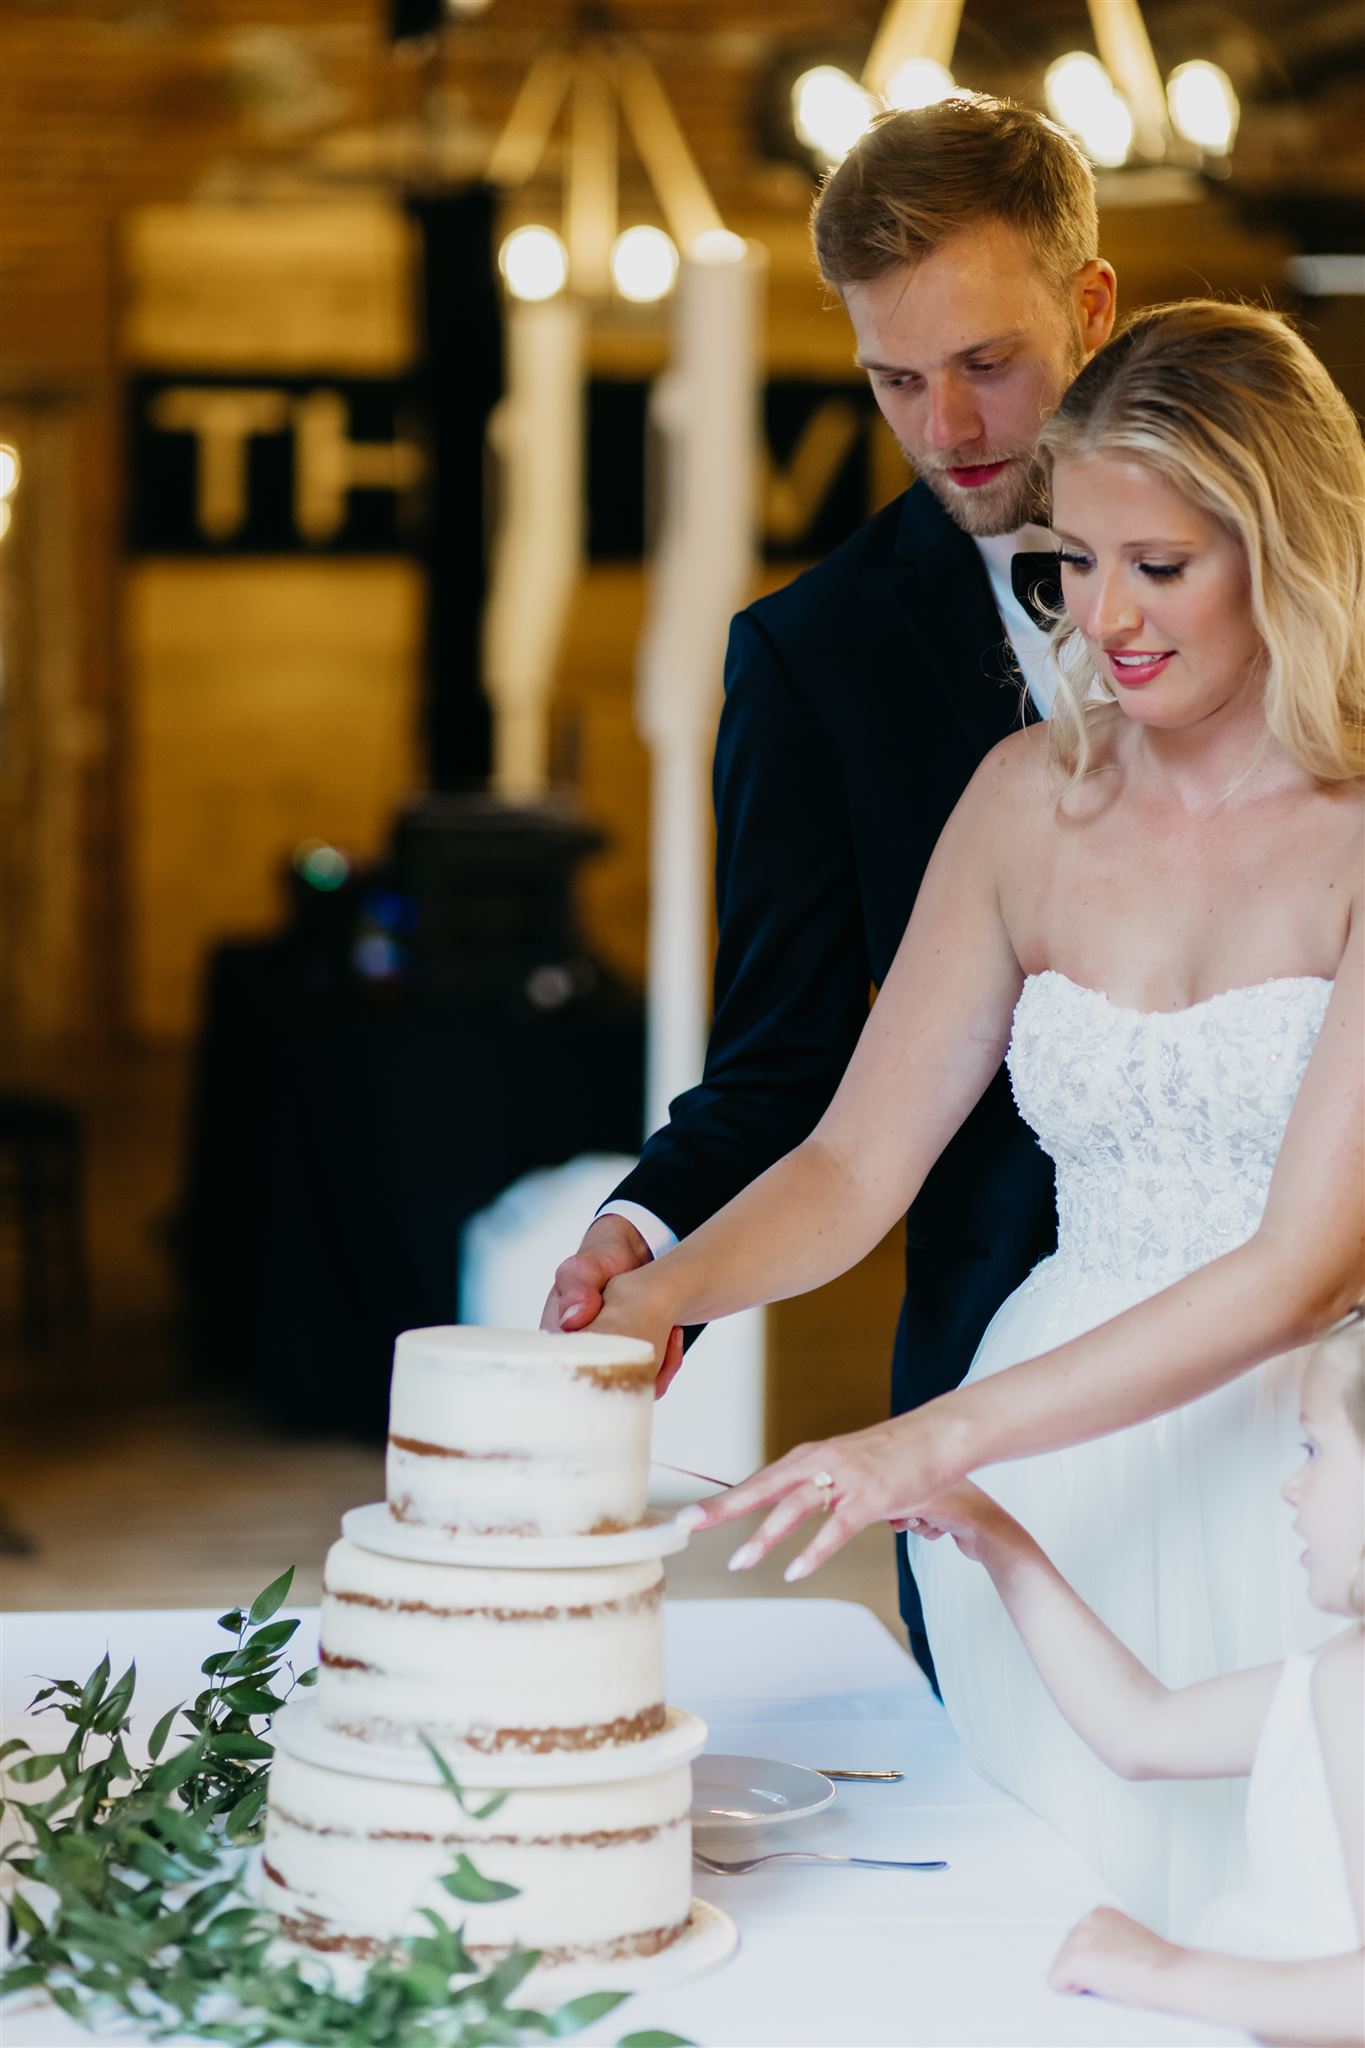 The bride and groom slicing the cake together as husband and wife